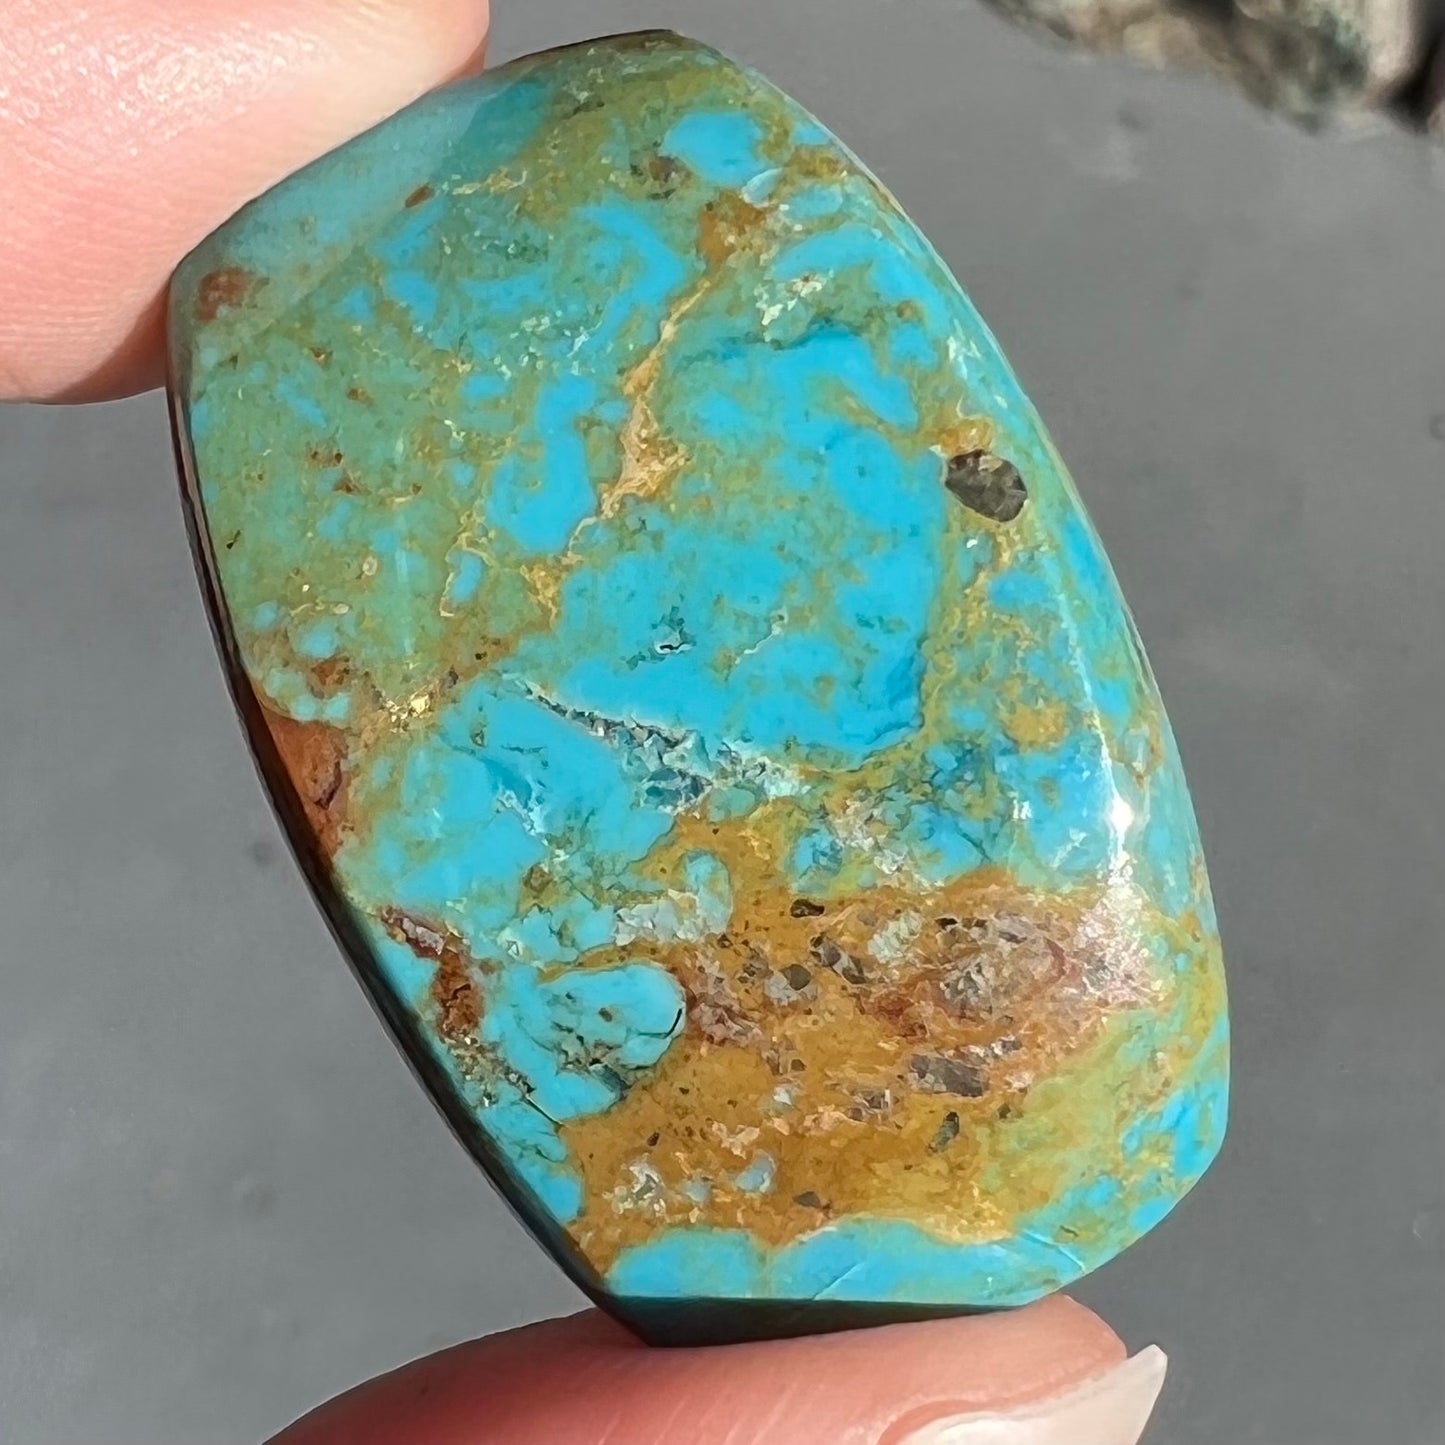 Blue Manassa turquoise stone with brown matrix being held in someone's fingertips.